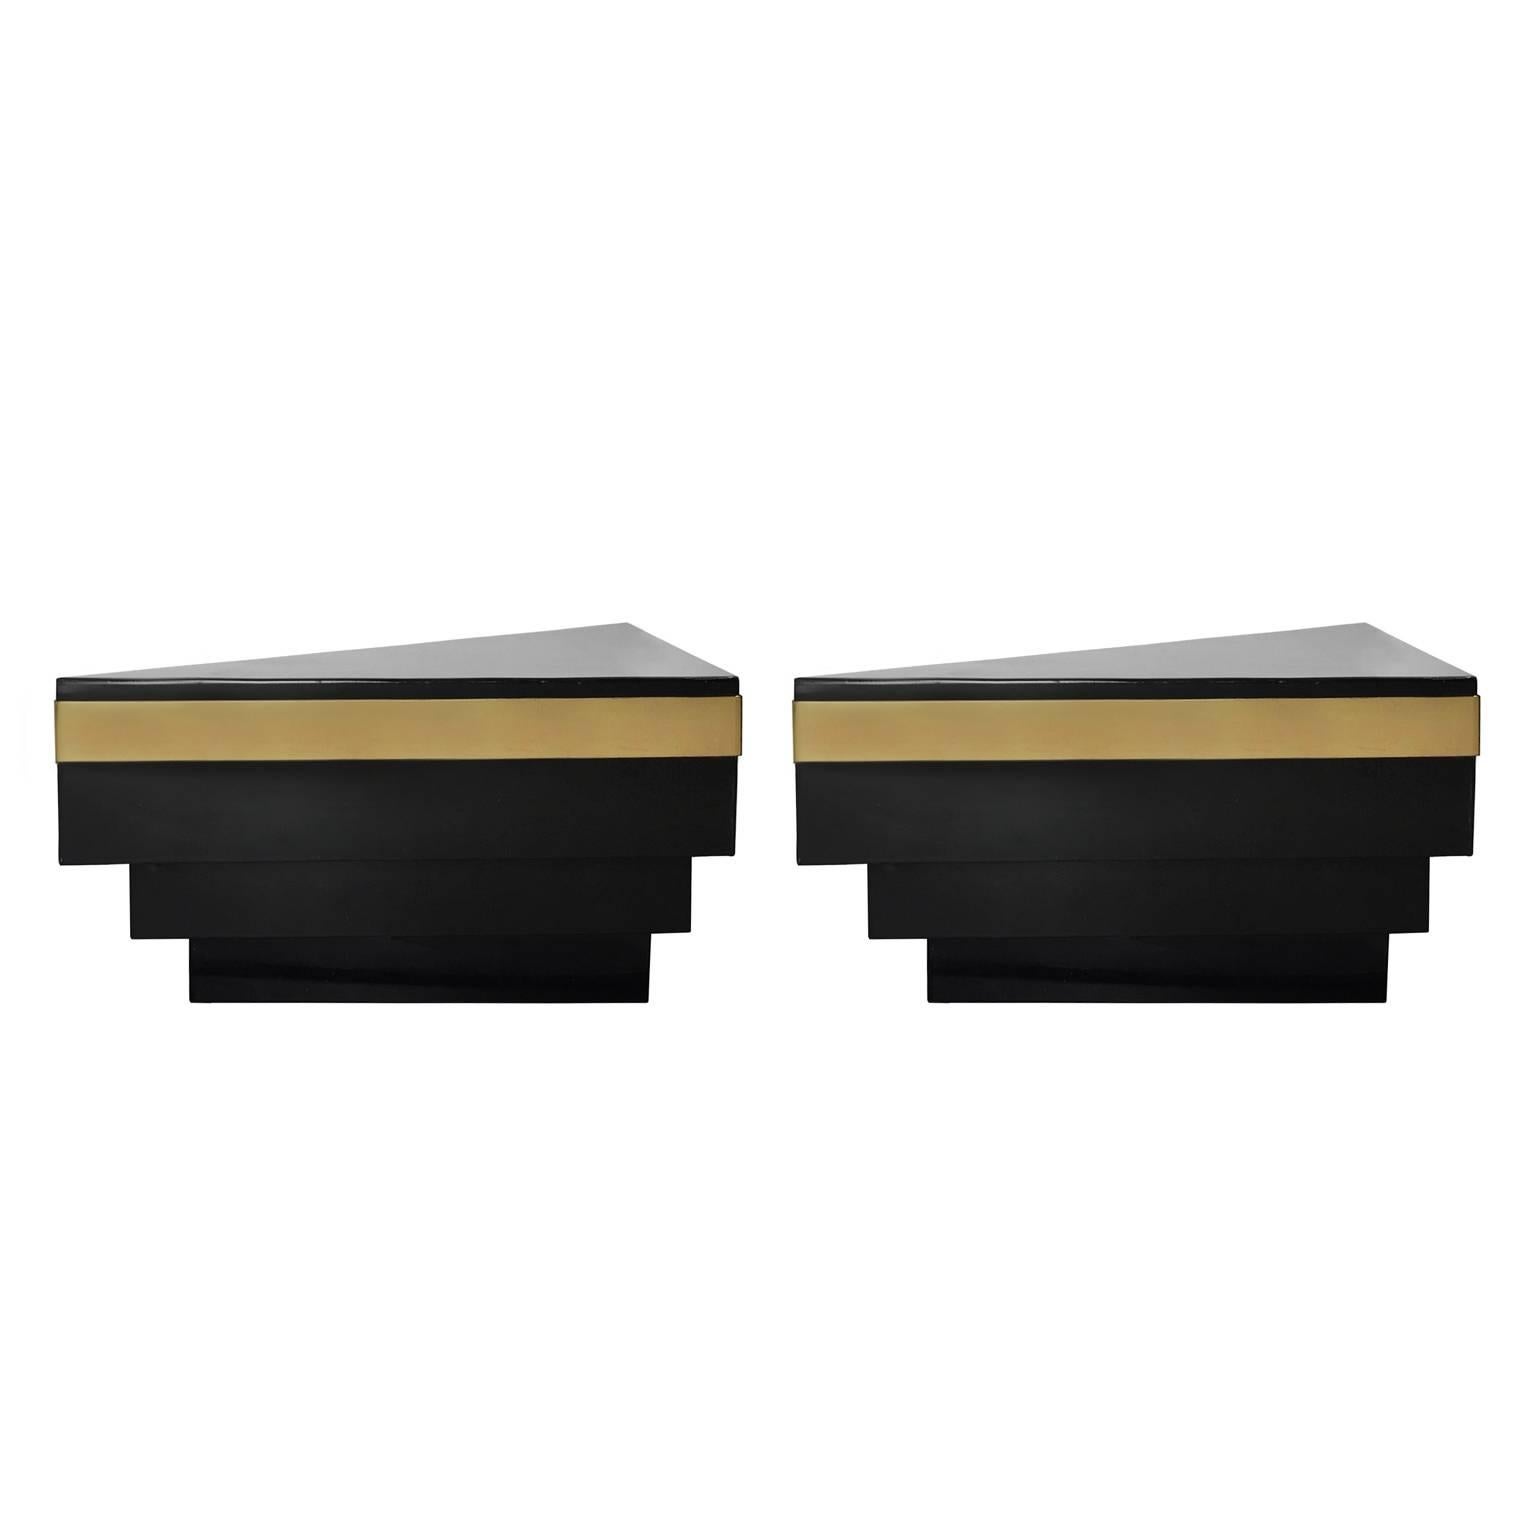 Pair of vintage C. Jeré triangular black and brass wall shelves. Signed and dated, 1984.